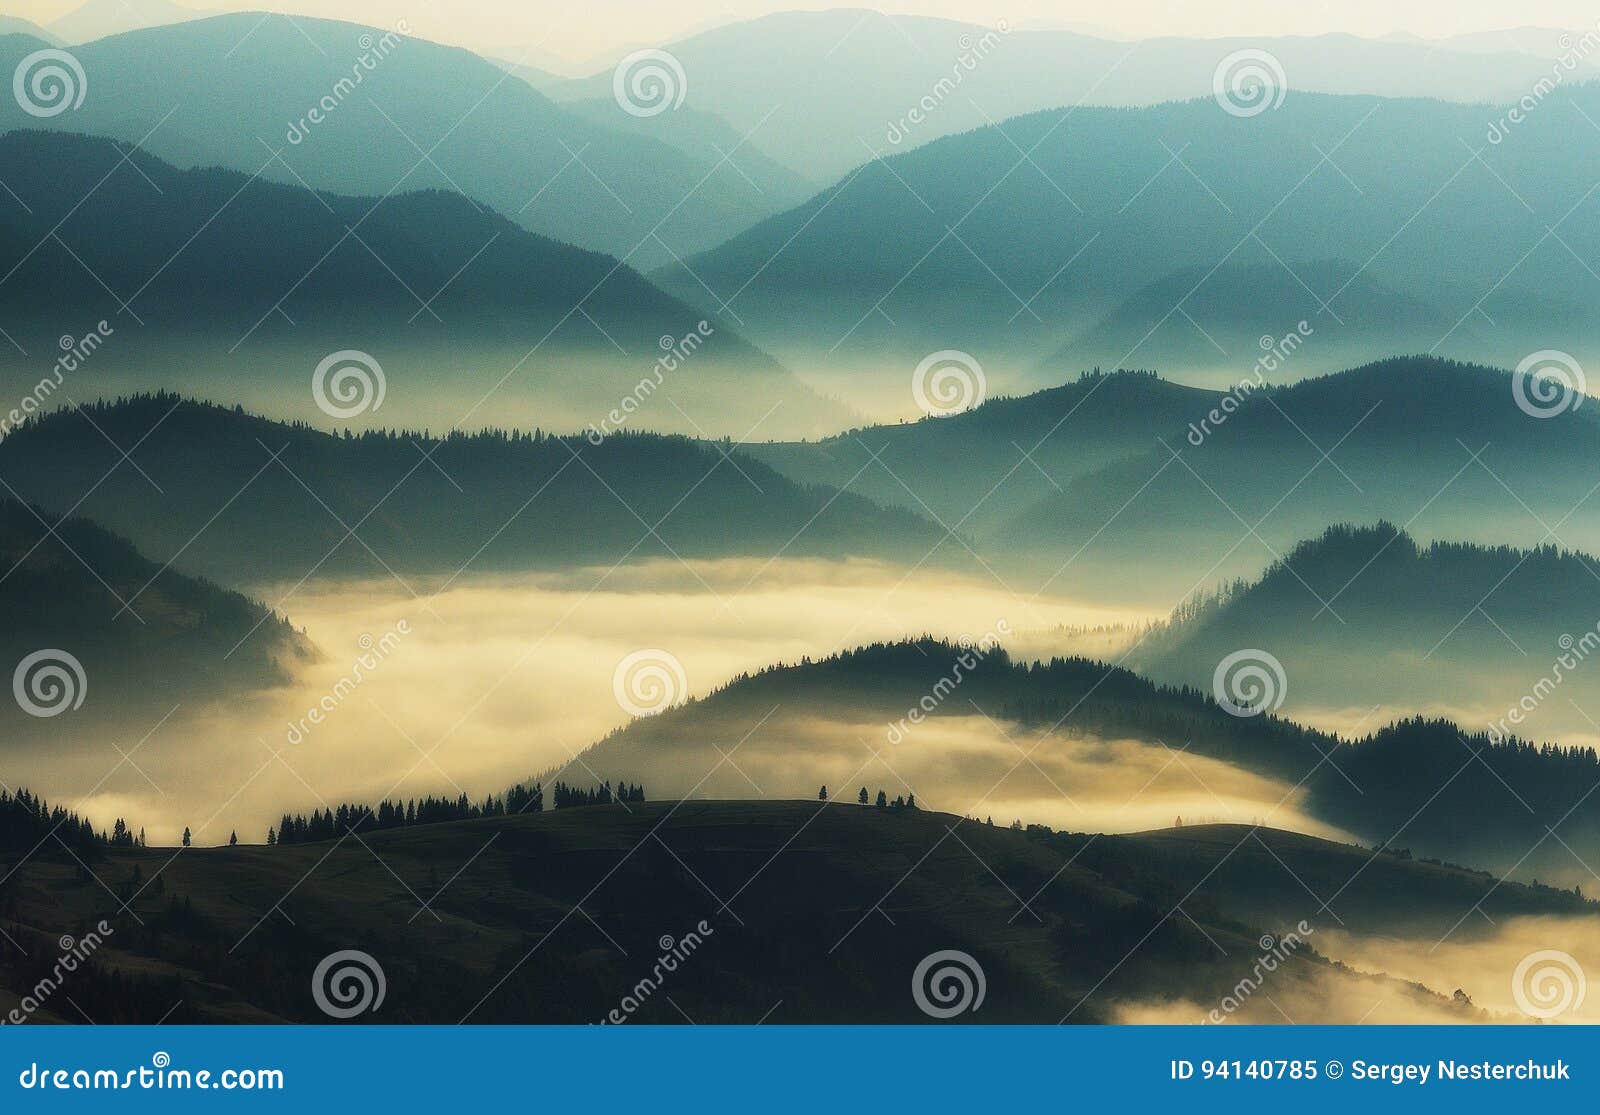 silhouettes of mountains. a misty autumn morning. dawn in the carpathians